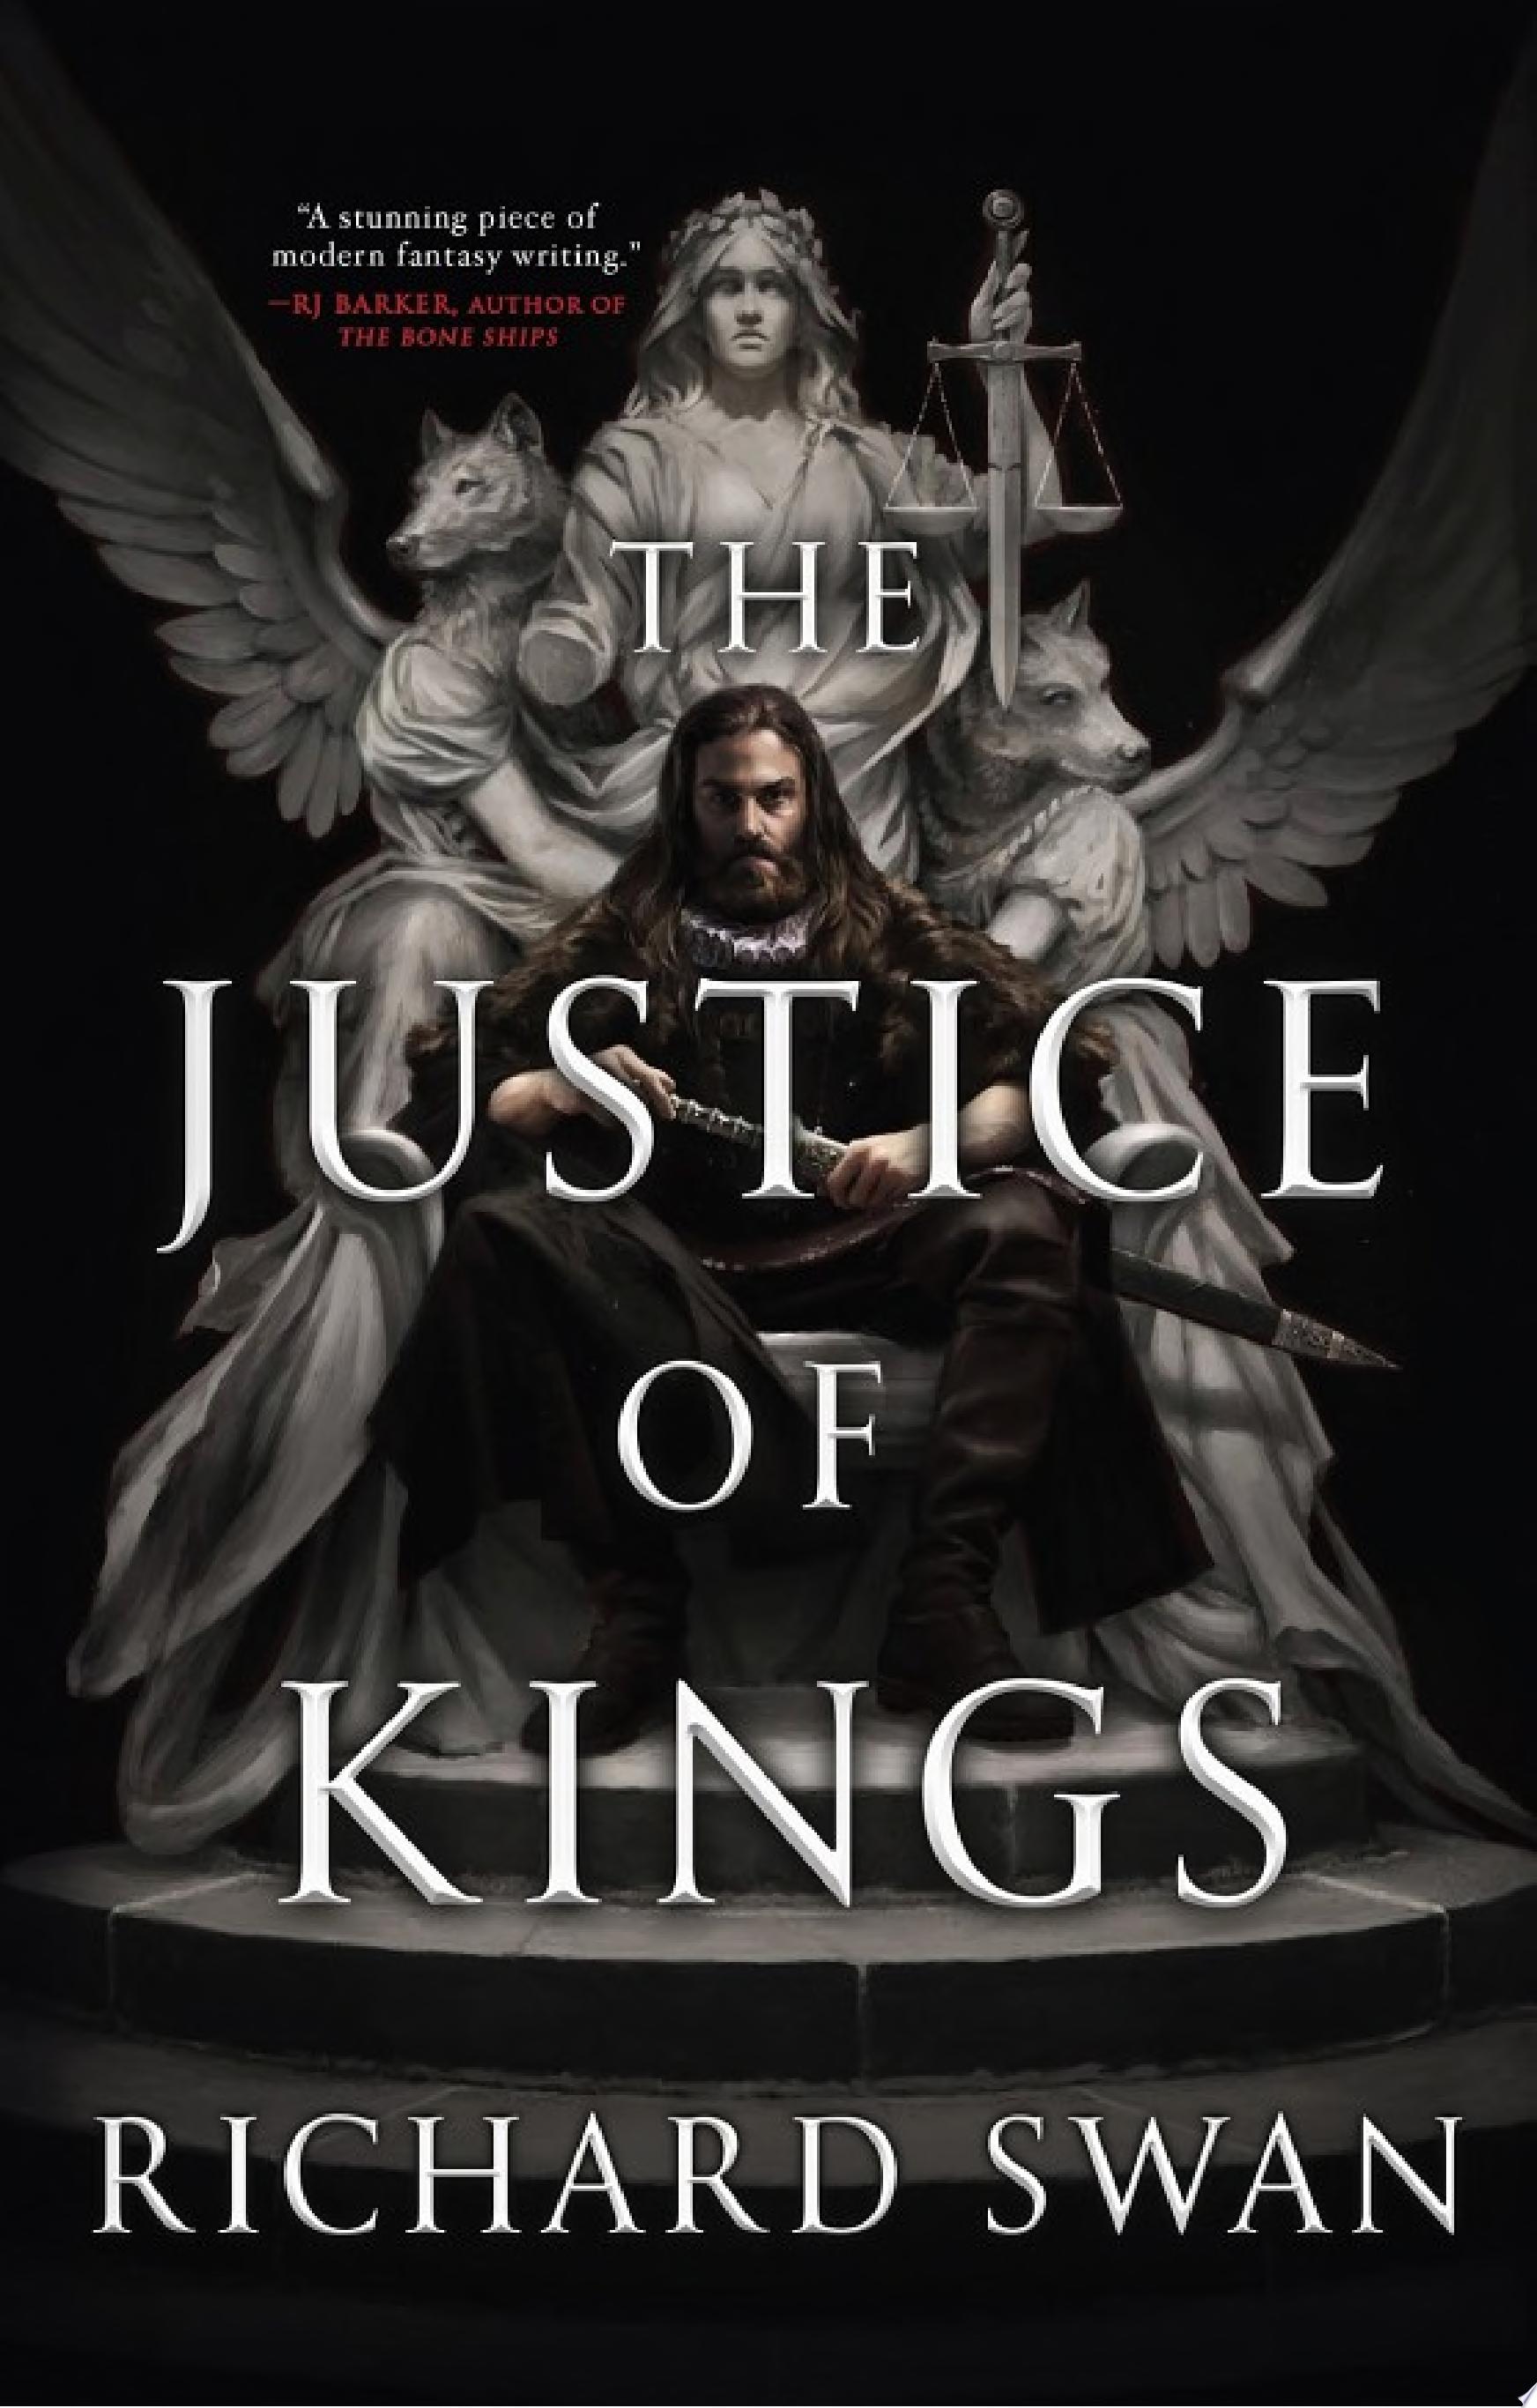 Image for "The Justice of Kings"